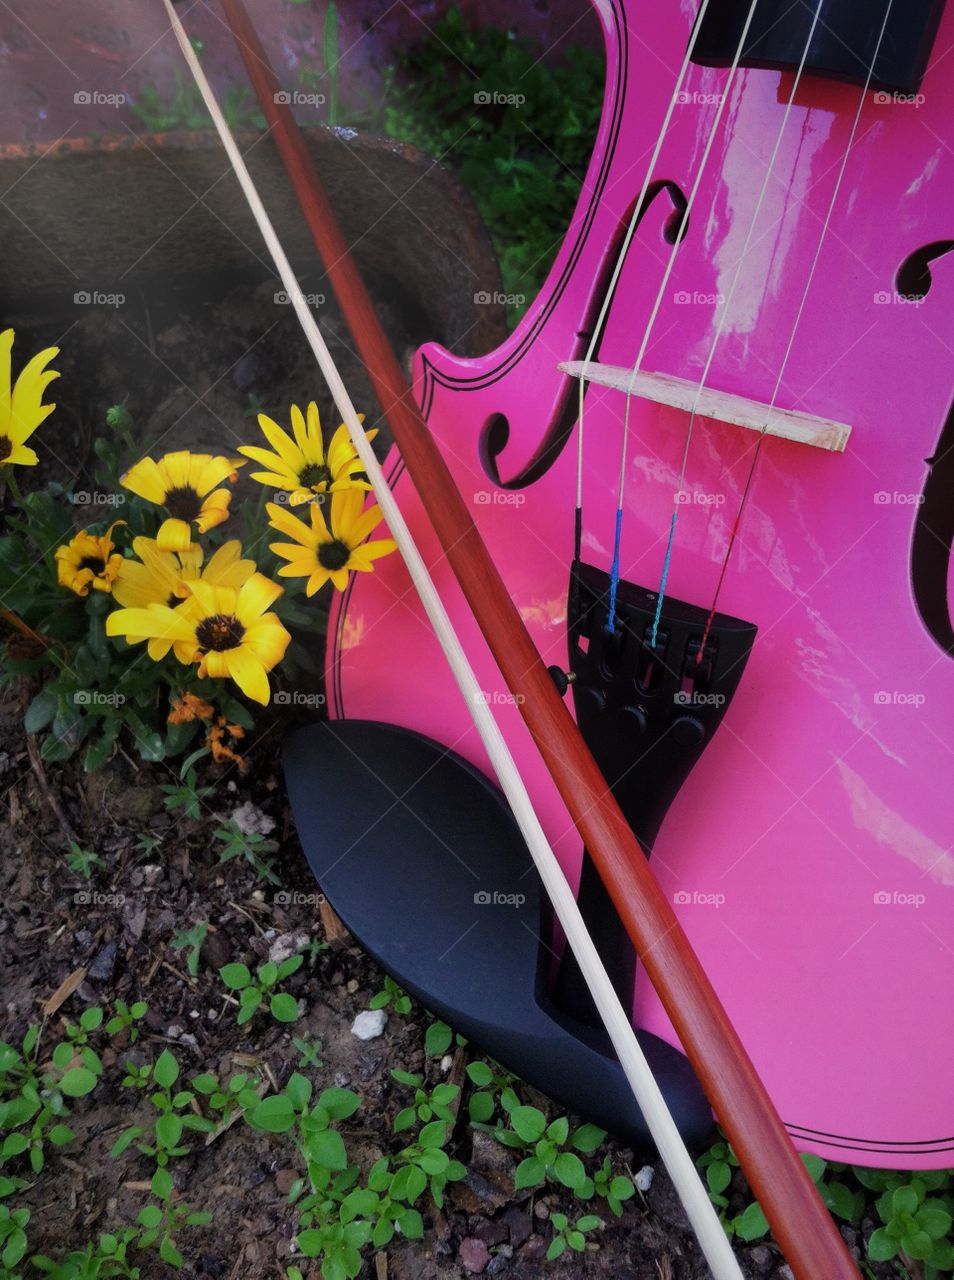 Flowers love music to.